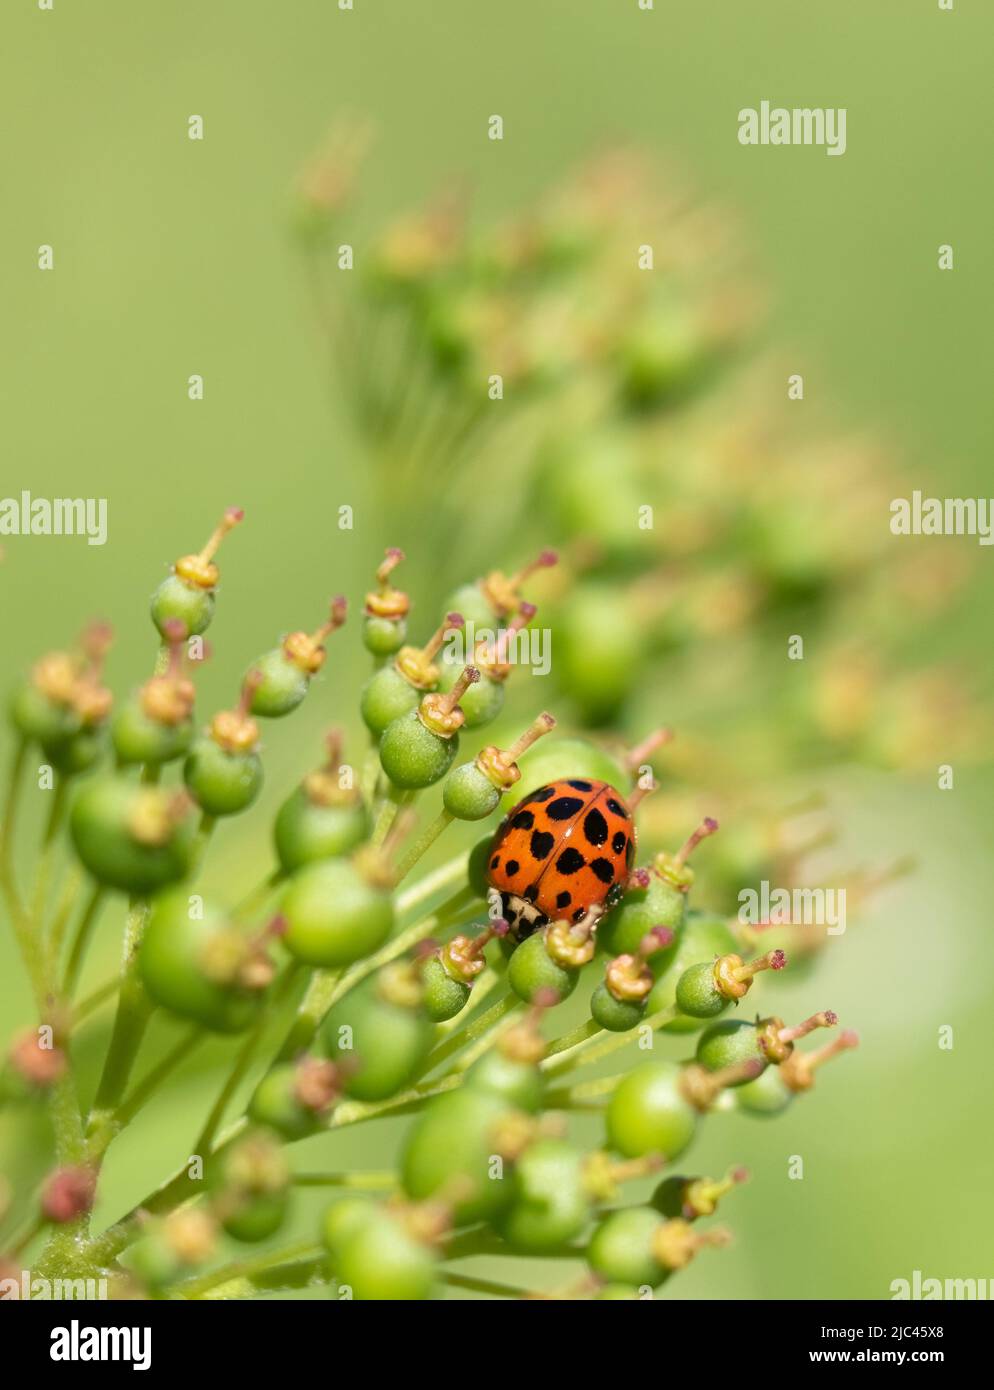 Close-up of a Lady Asian Beetle on a blooming plant Stock Photo